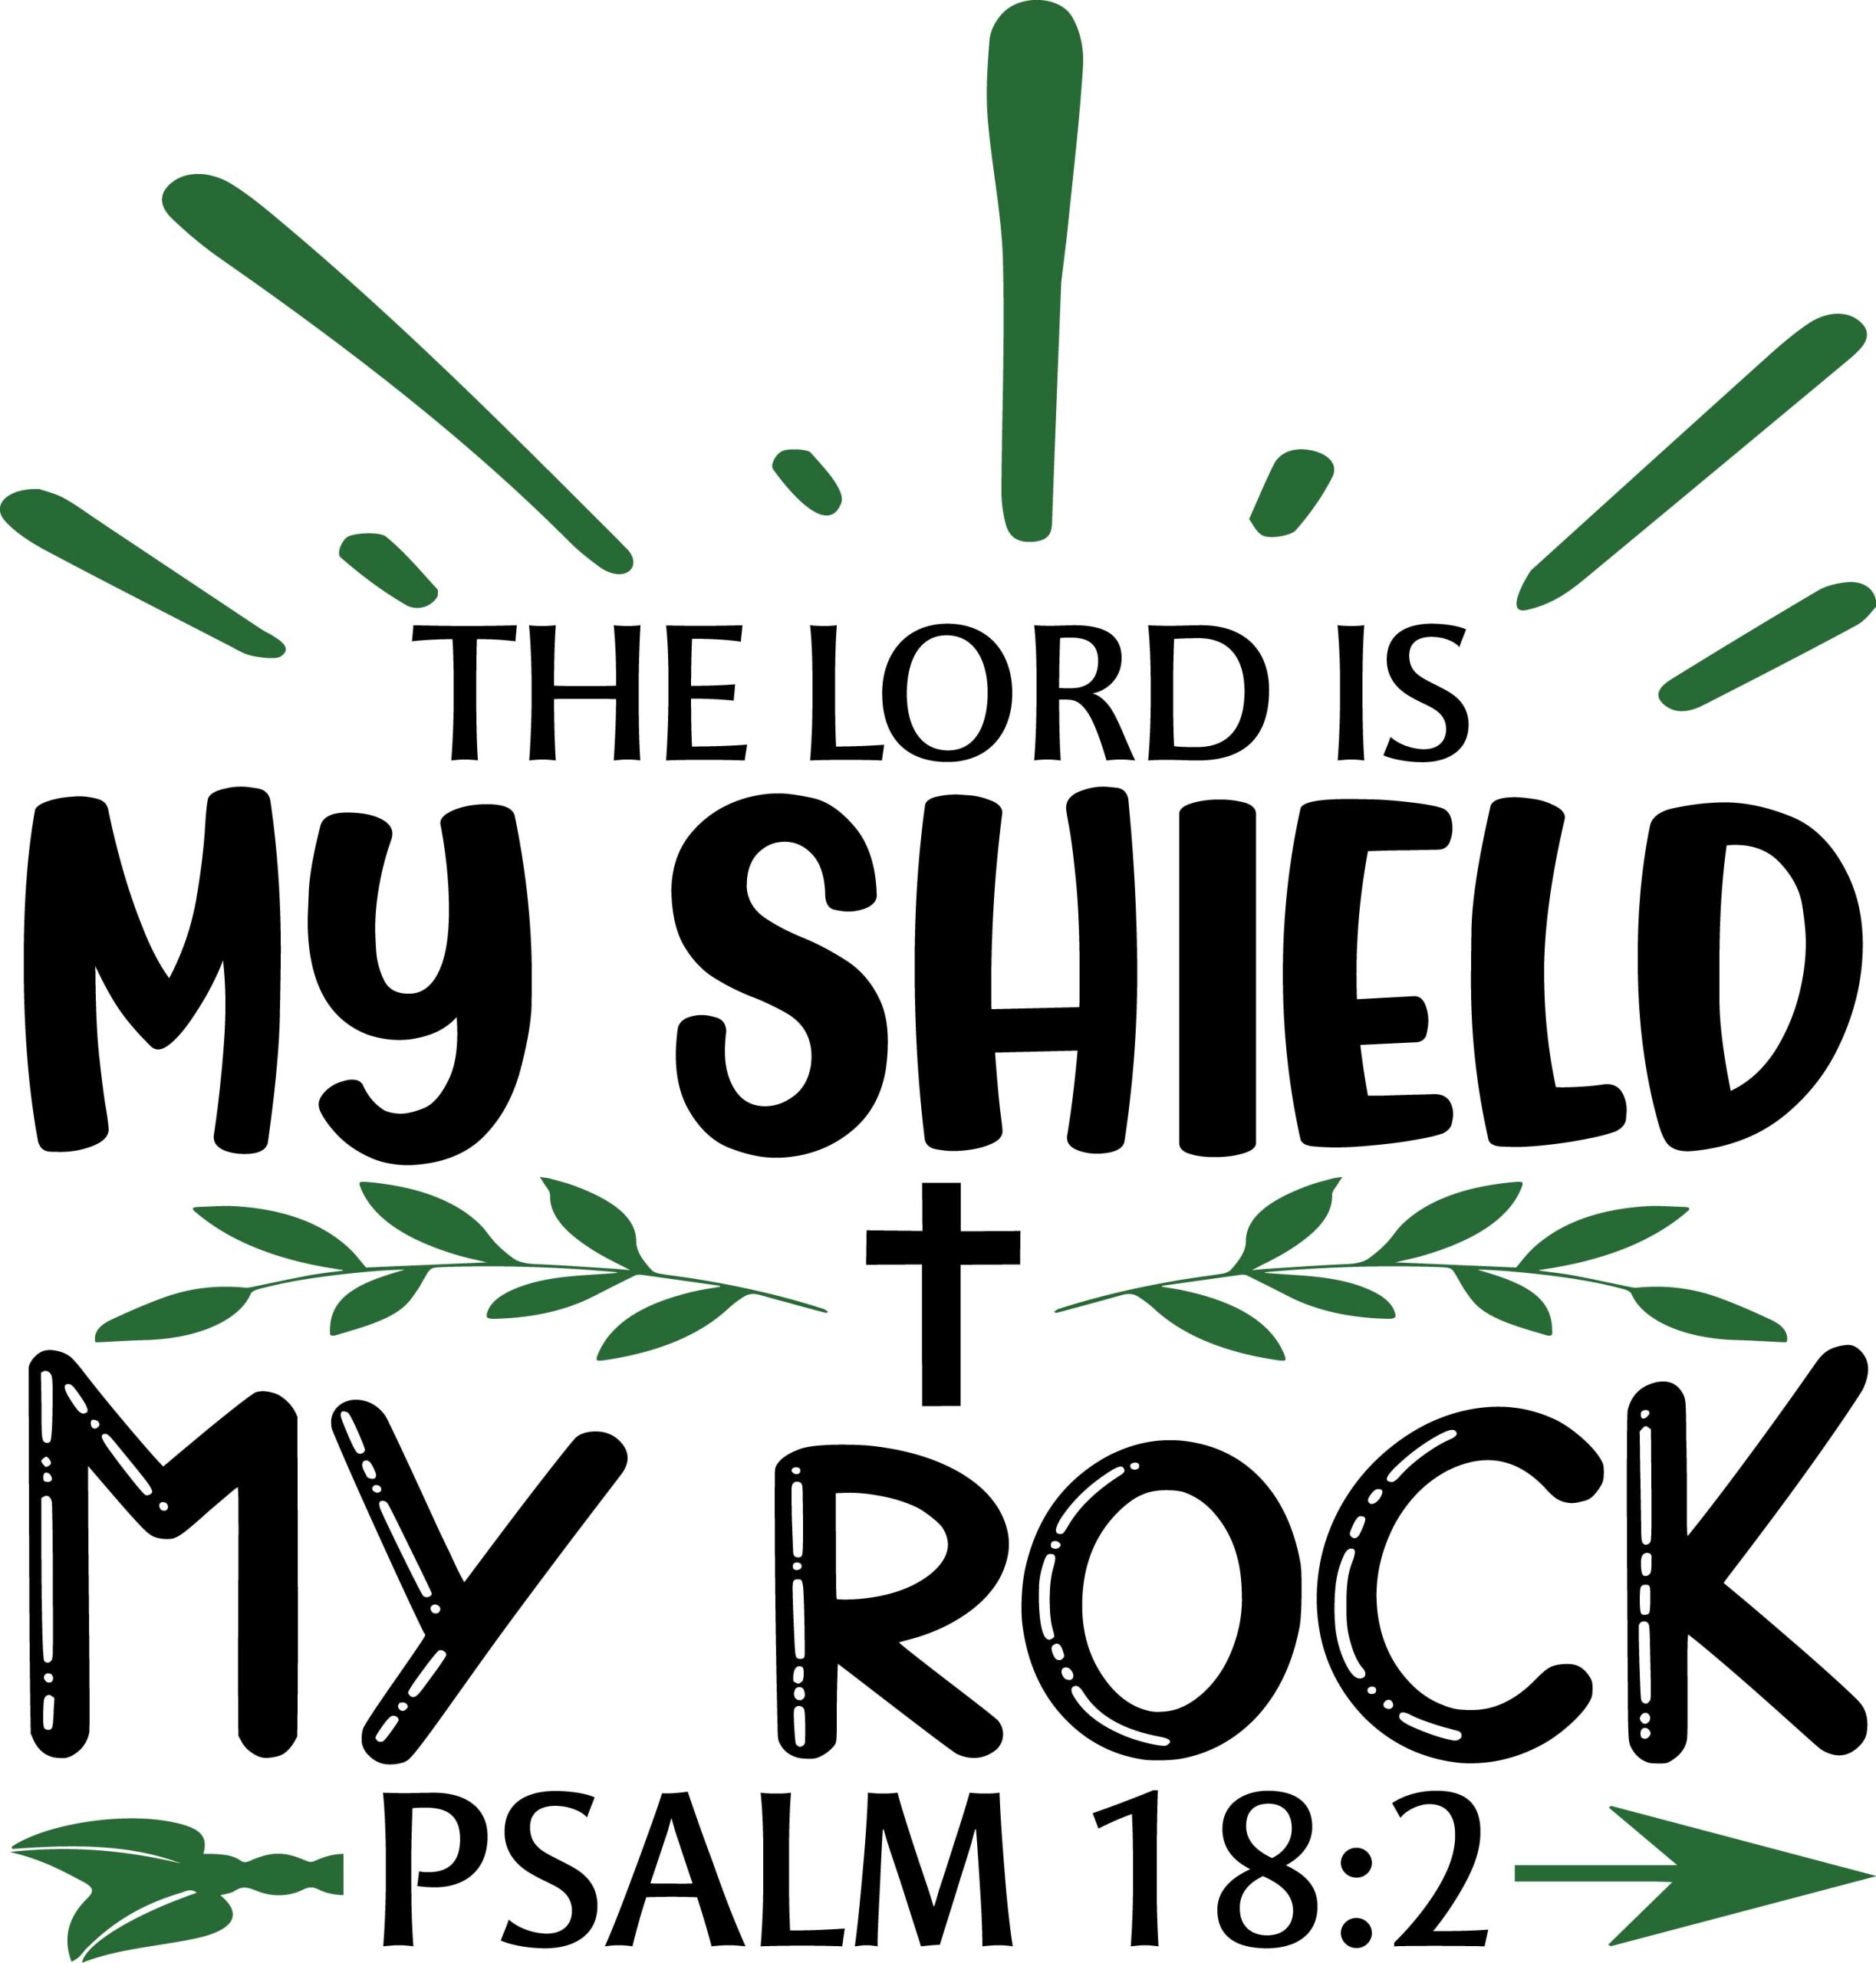 the lord is my rock my shield psalm 18:2, bible verses, scripture verses, svg files, passages, sayings, cricut designs, silhouette, embroidery, bundle, free cut files, design space, vector